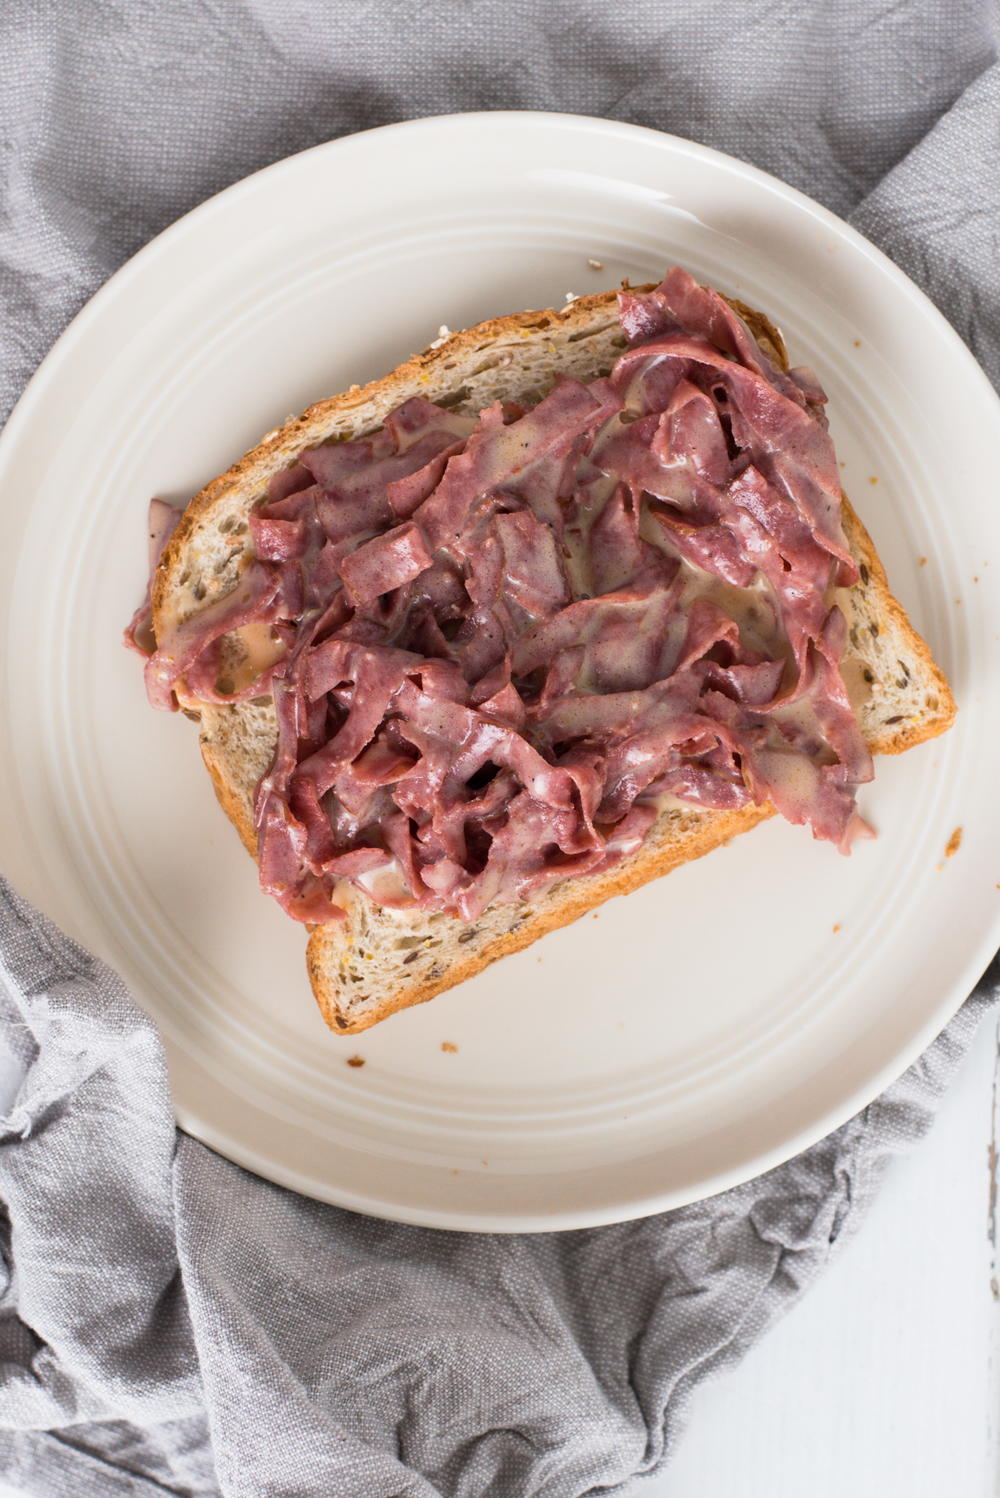 Classic Creamed Chipped Beef on Toast | RecipeLion.com